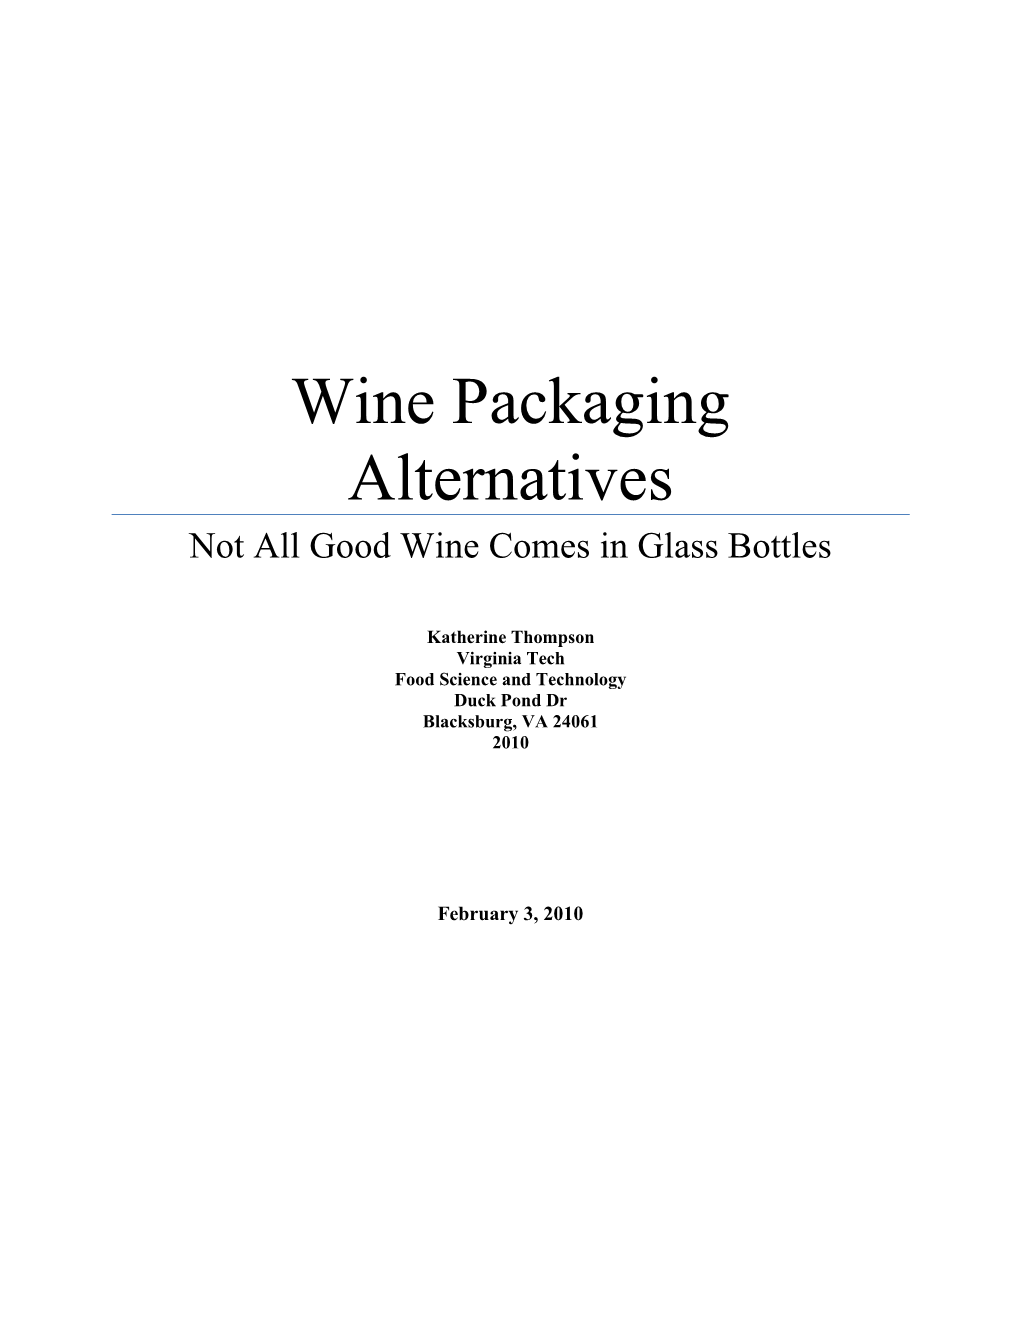 Wine Packaging Alternatives Not All Good Wine Comes in Glass Bottles